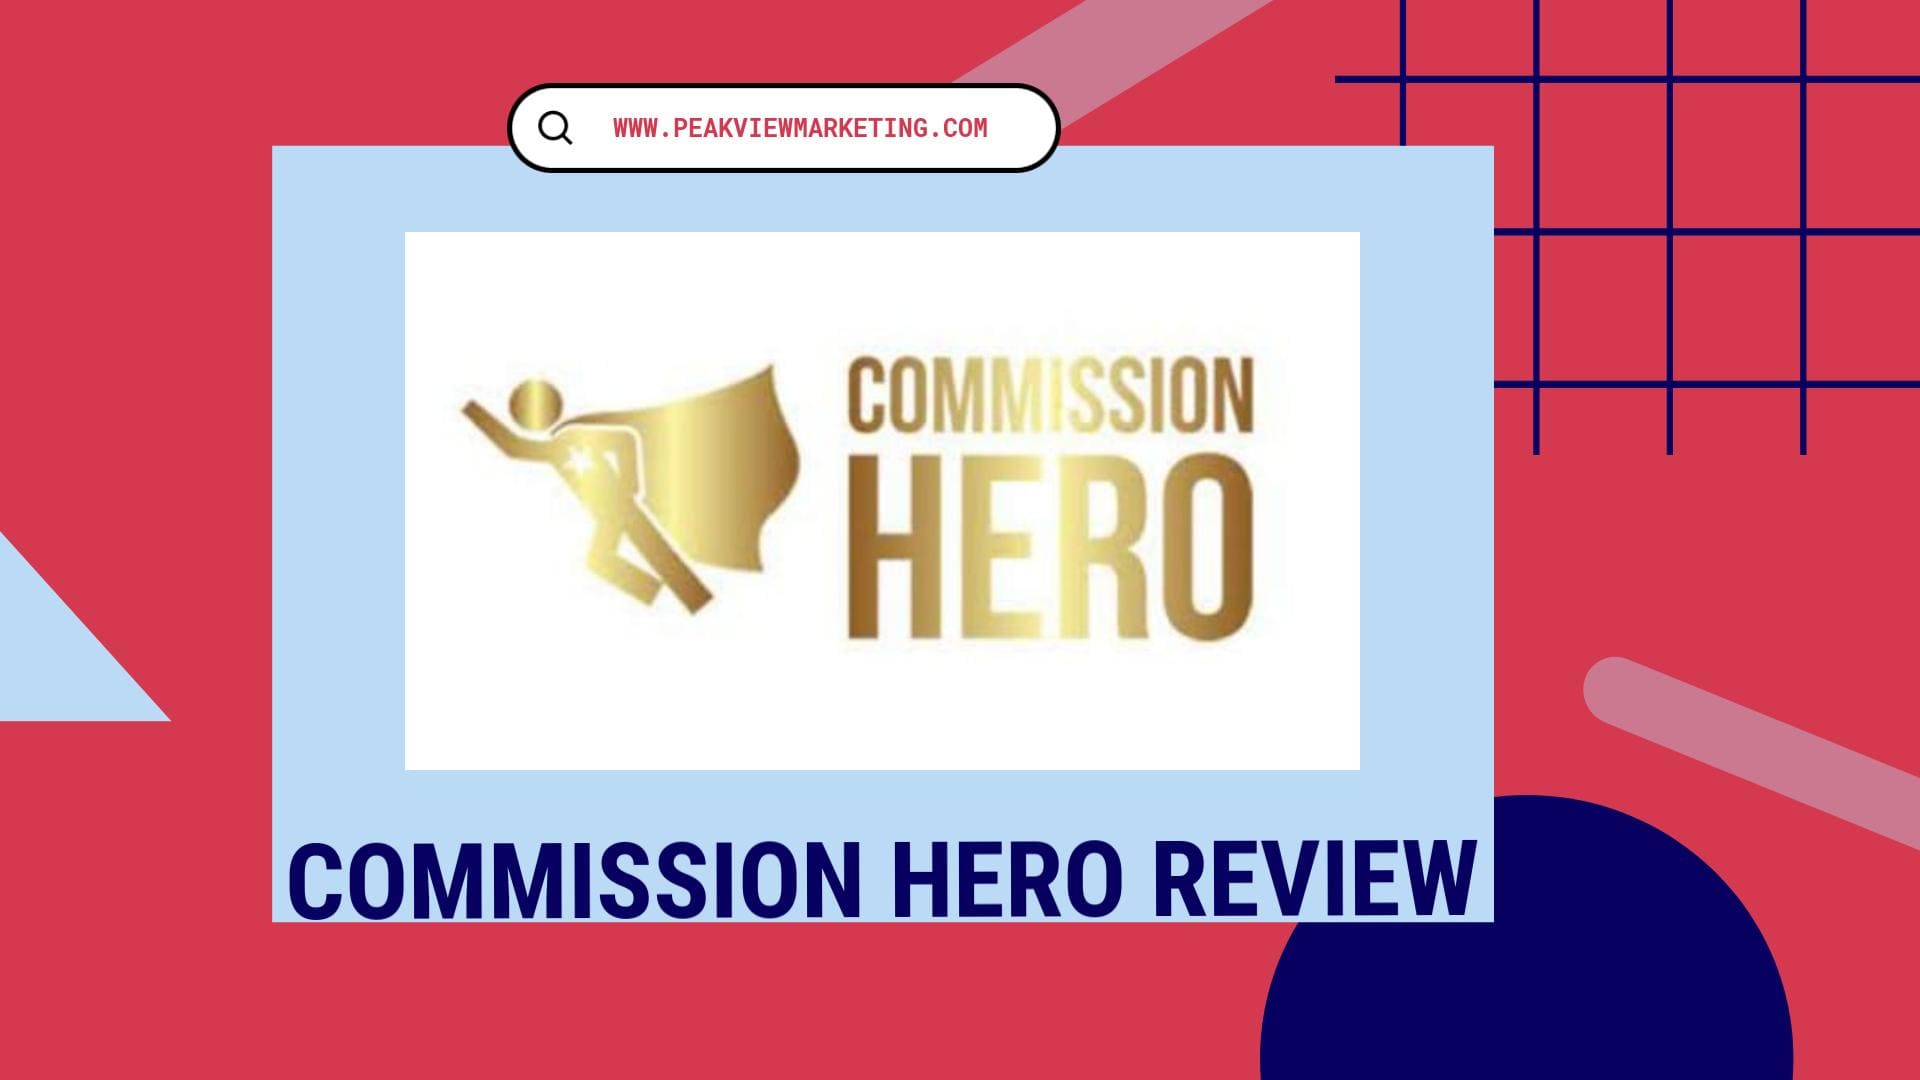 Commission Hero Review Image